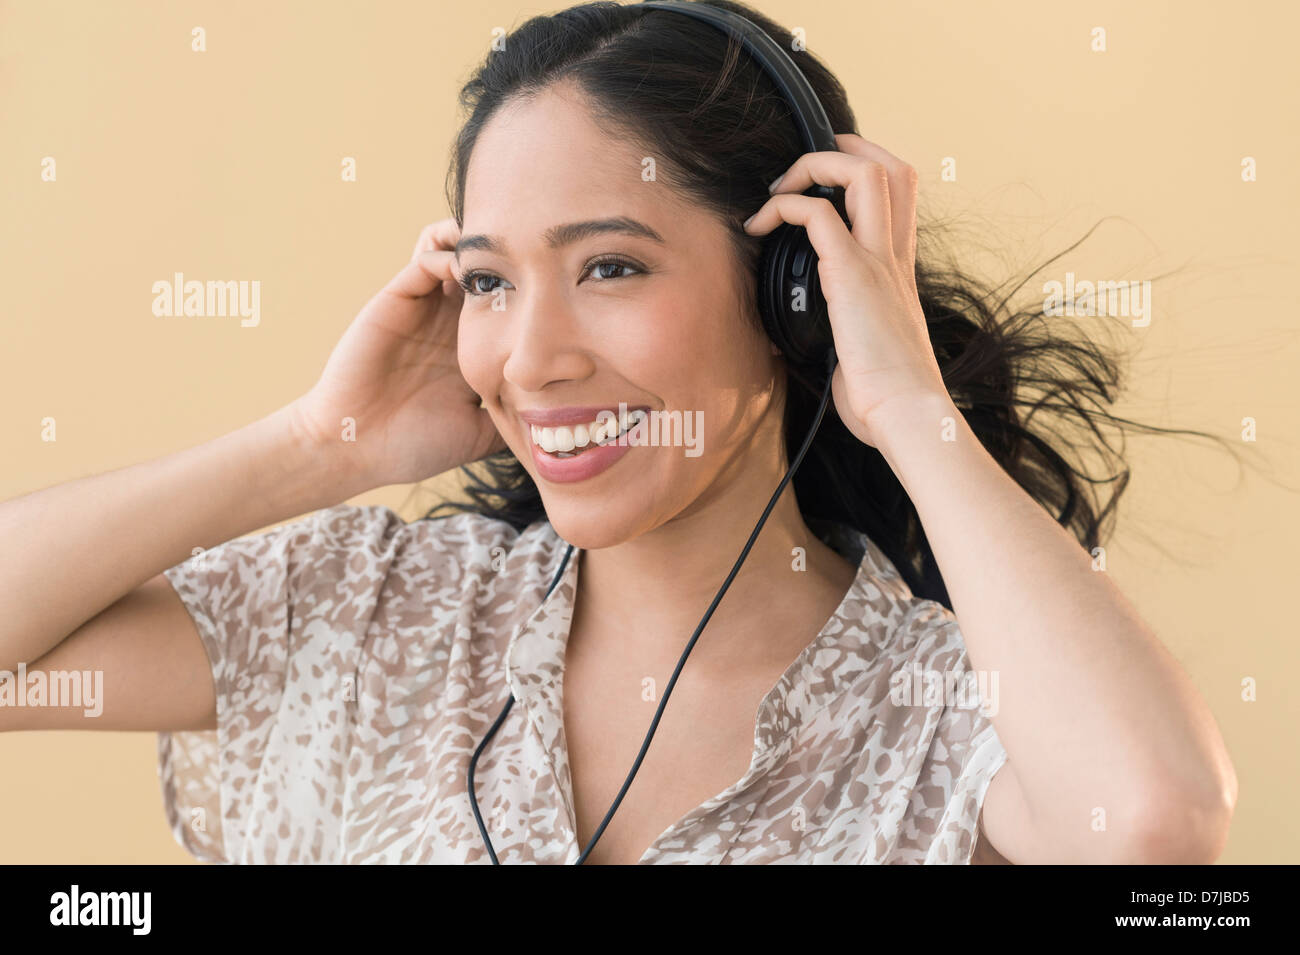 Portrait of young woman in headphones Banque D'Images